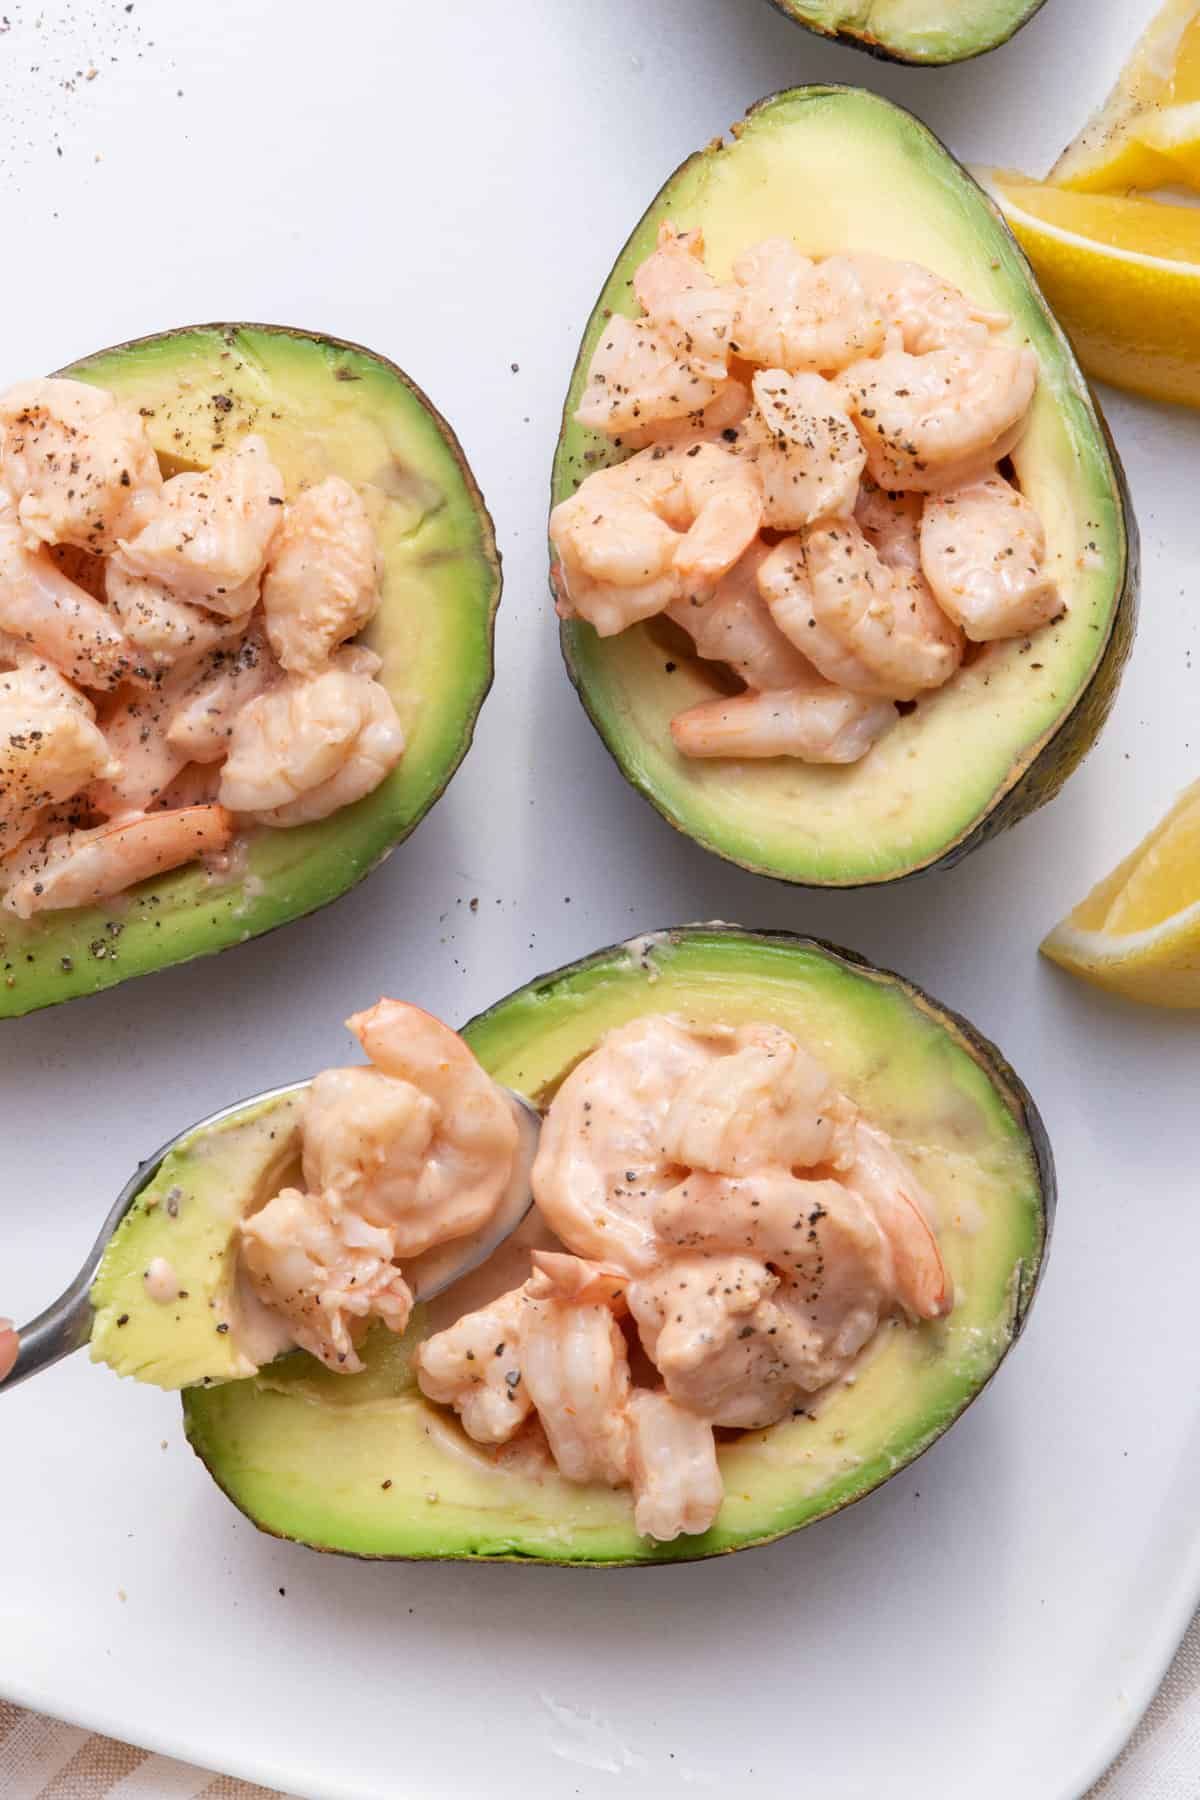 Spoon scooping out bite of shrimp cocktail with avocado